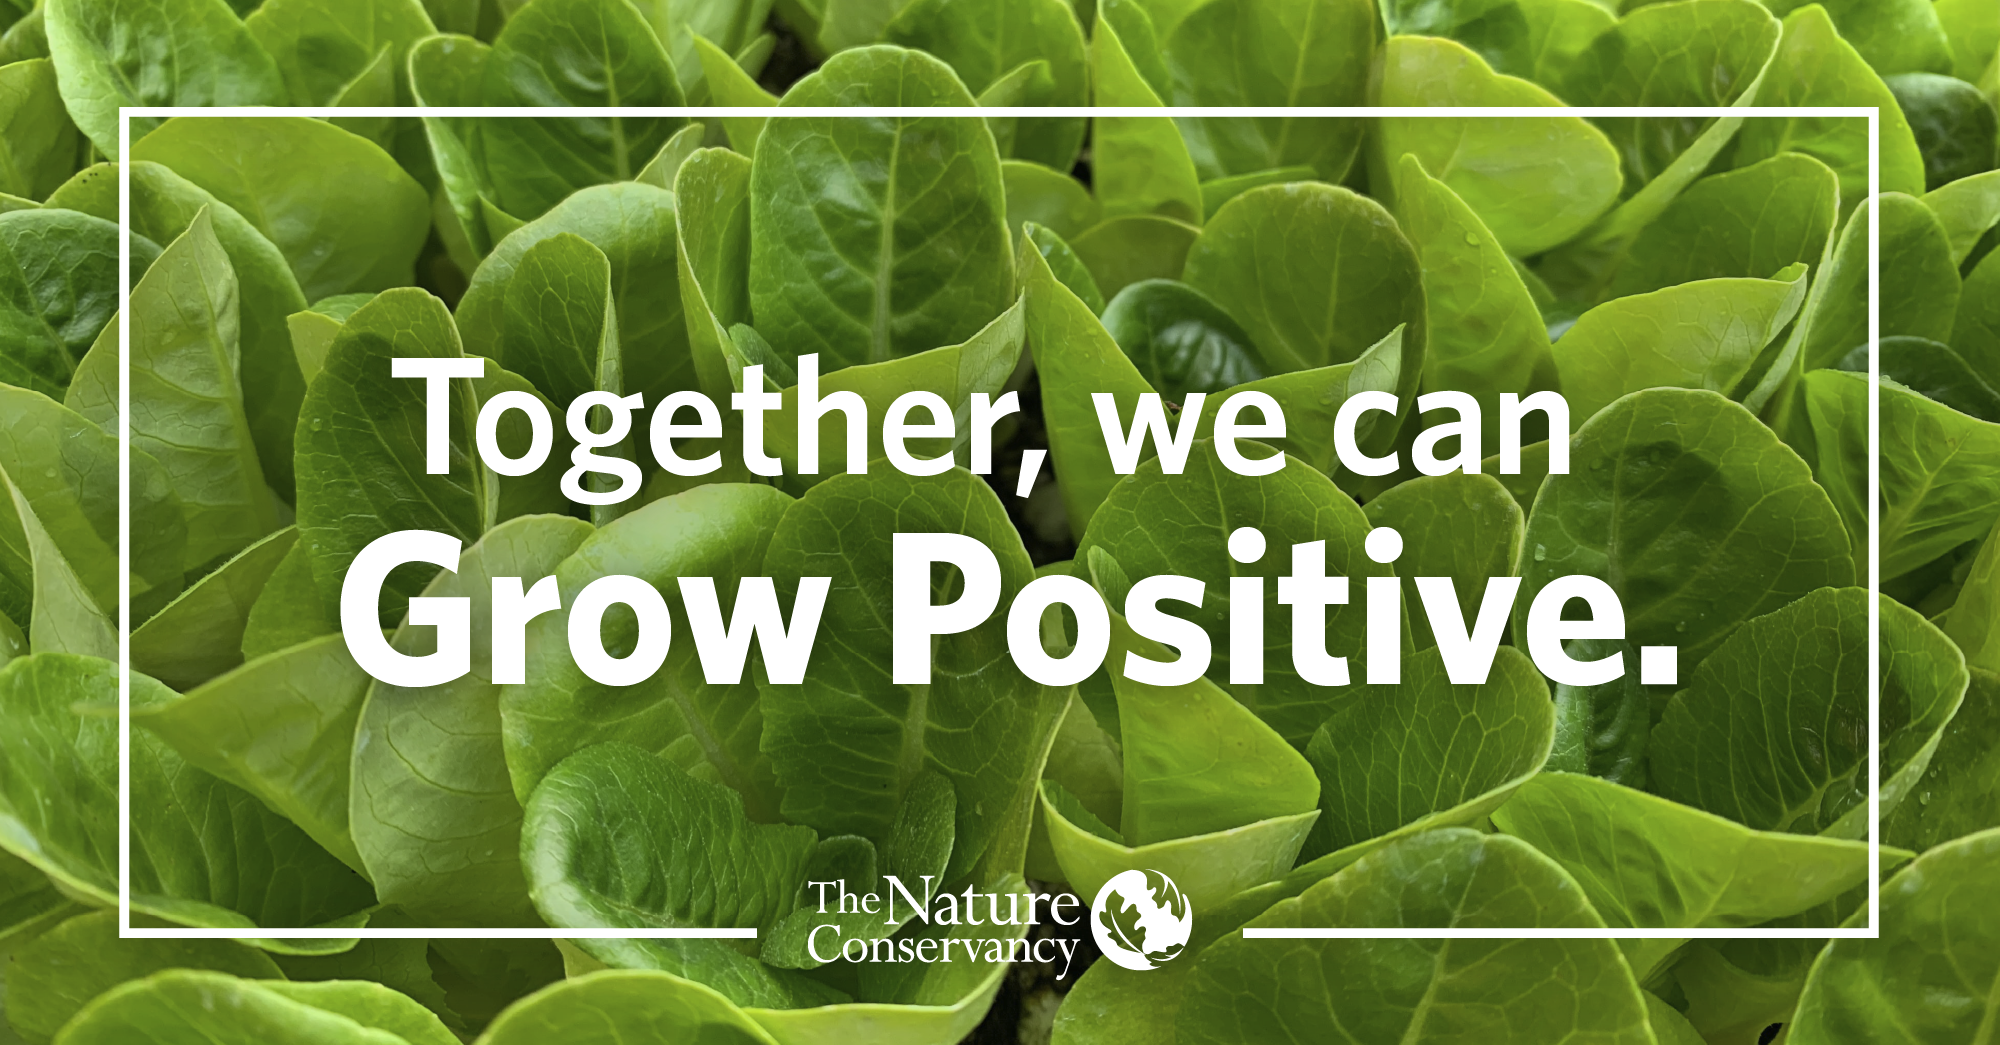 white text that says 'together, we can grow positive' with tnc logo over a photo of dark red apples